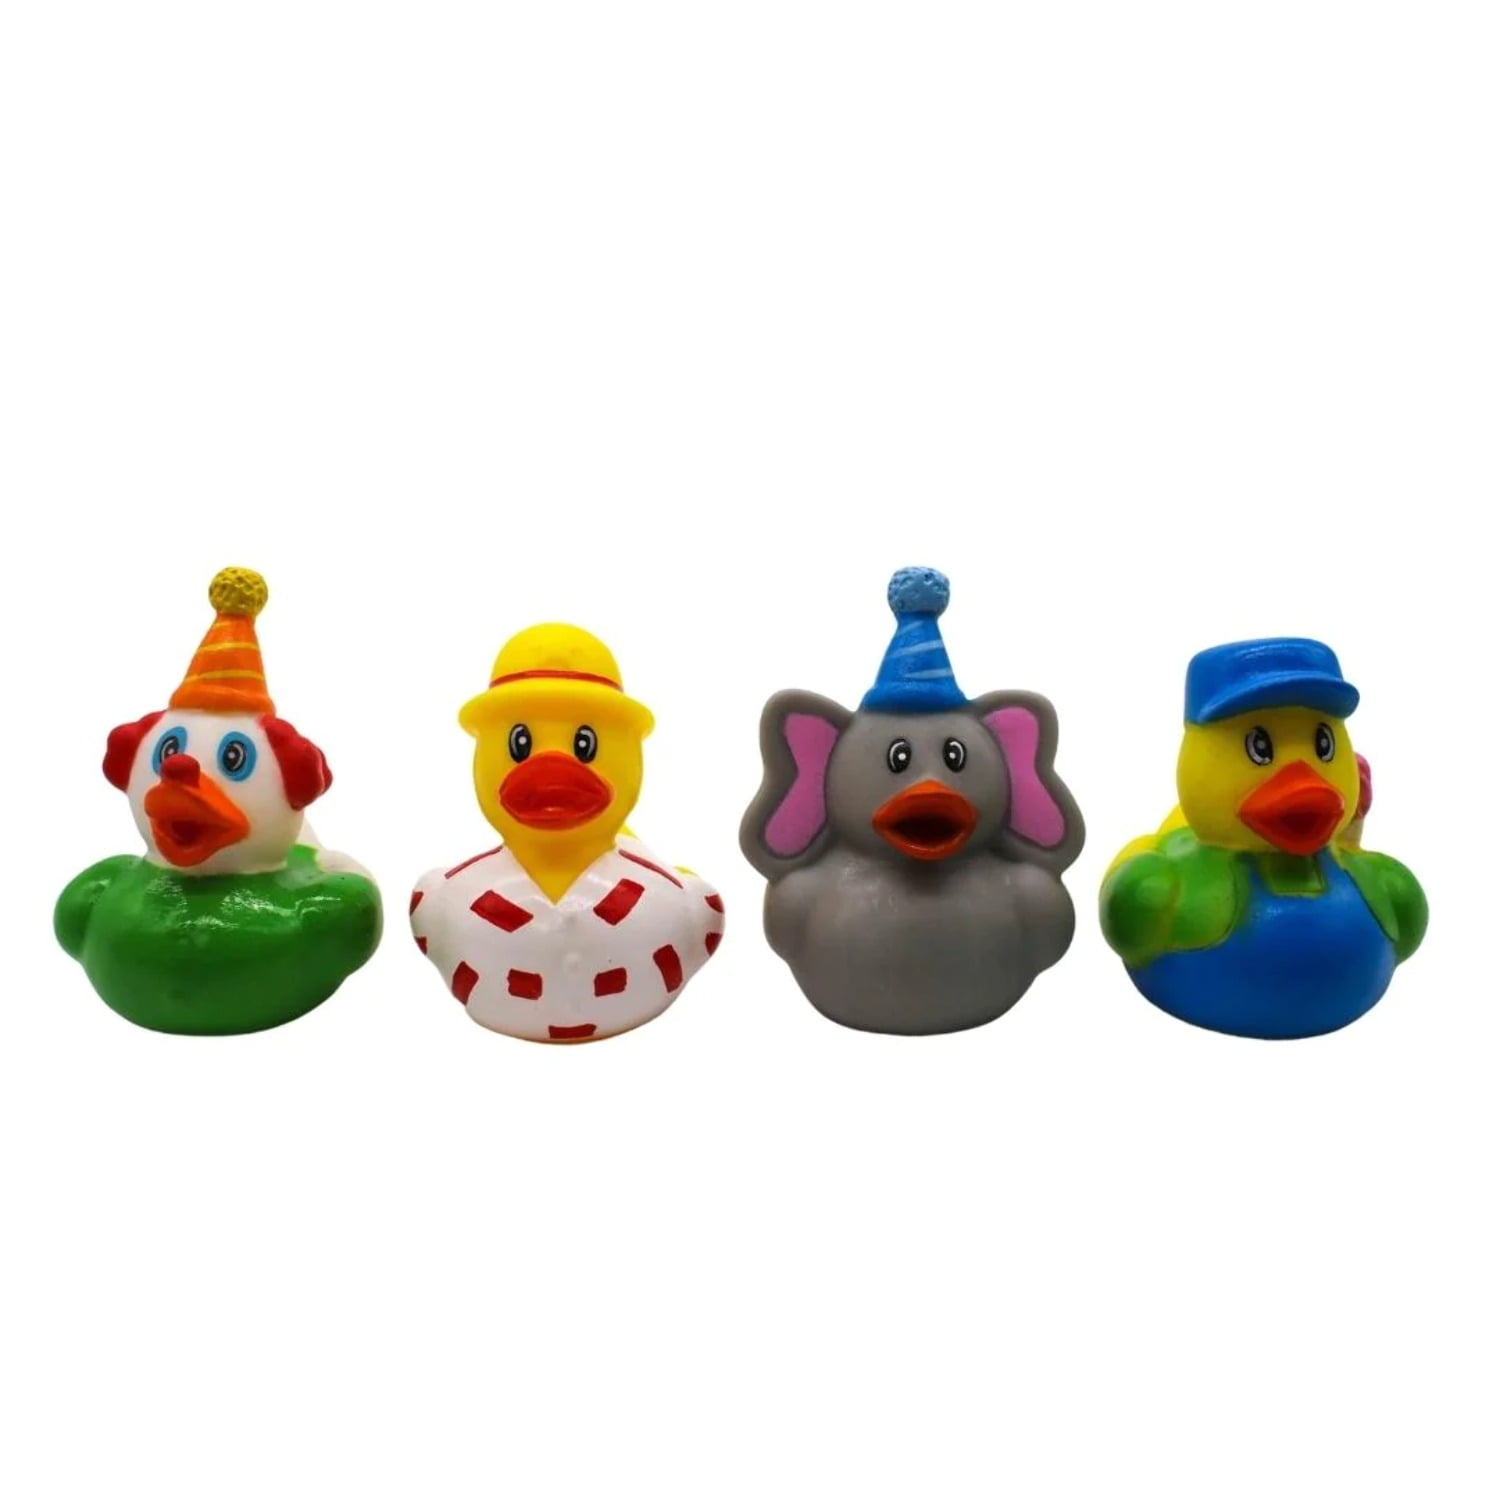 Gone Fishing - Ducks from Deluxebase. Novelty Fishing Game Bath Toys.  Traditional Hook-a-Duck Style Carnival Games for Kids. Educational Toys and  Kids Party Favors. 